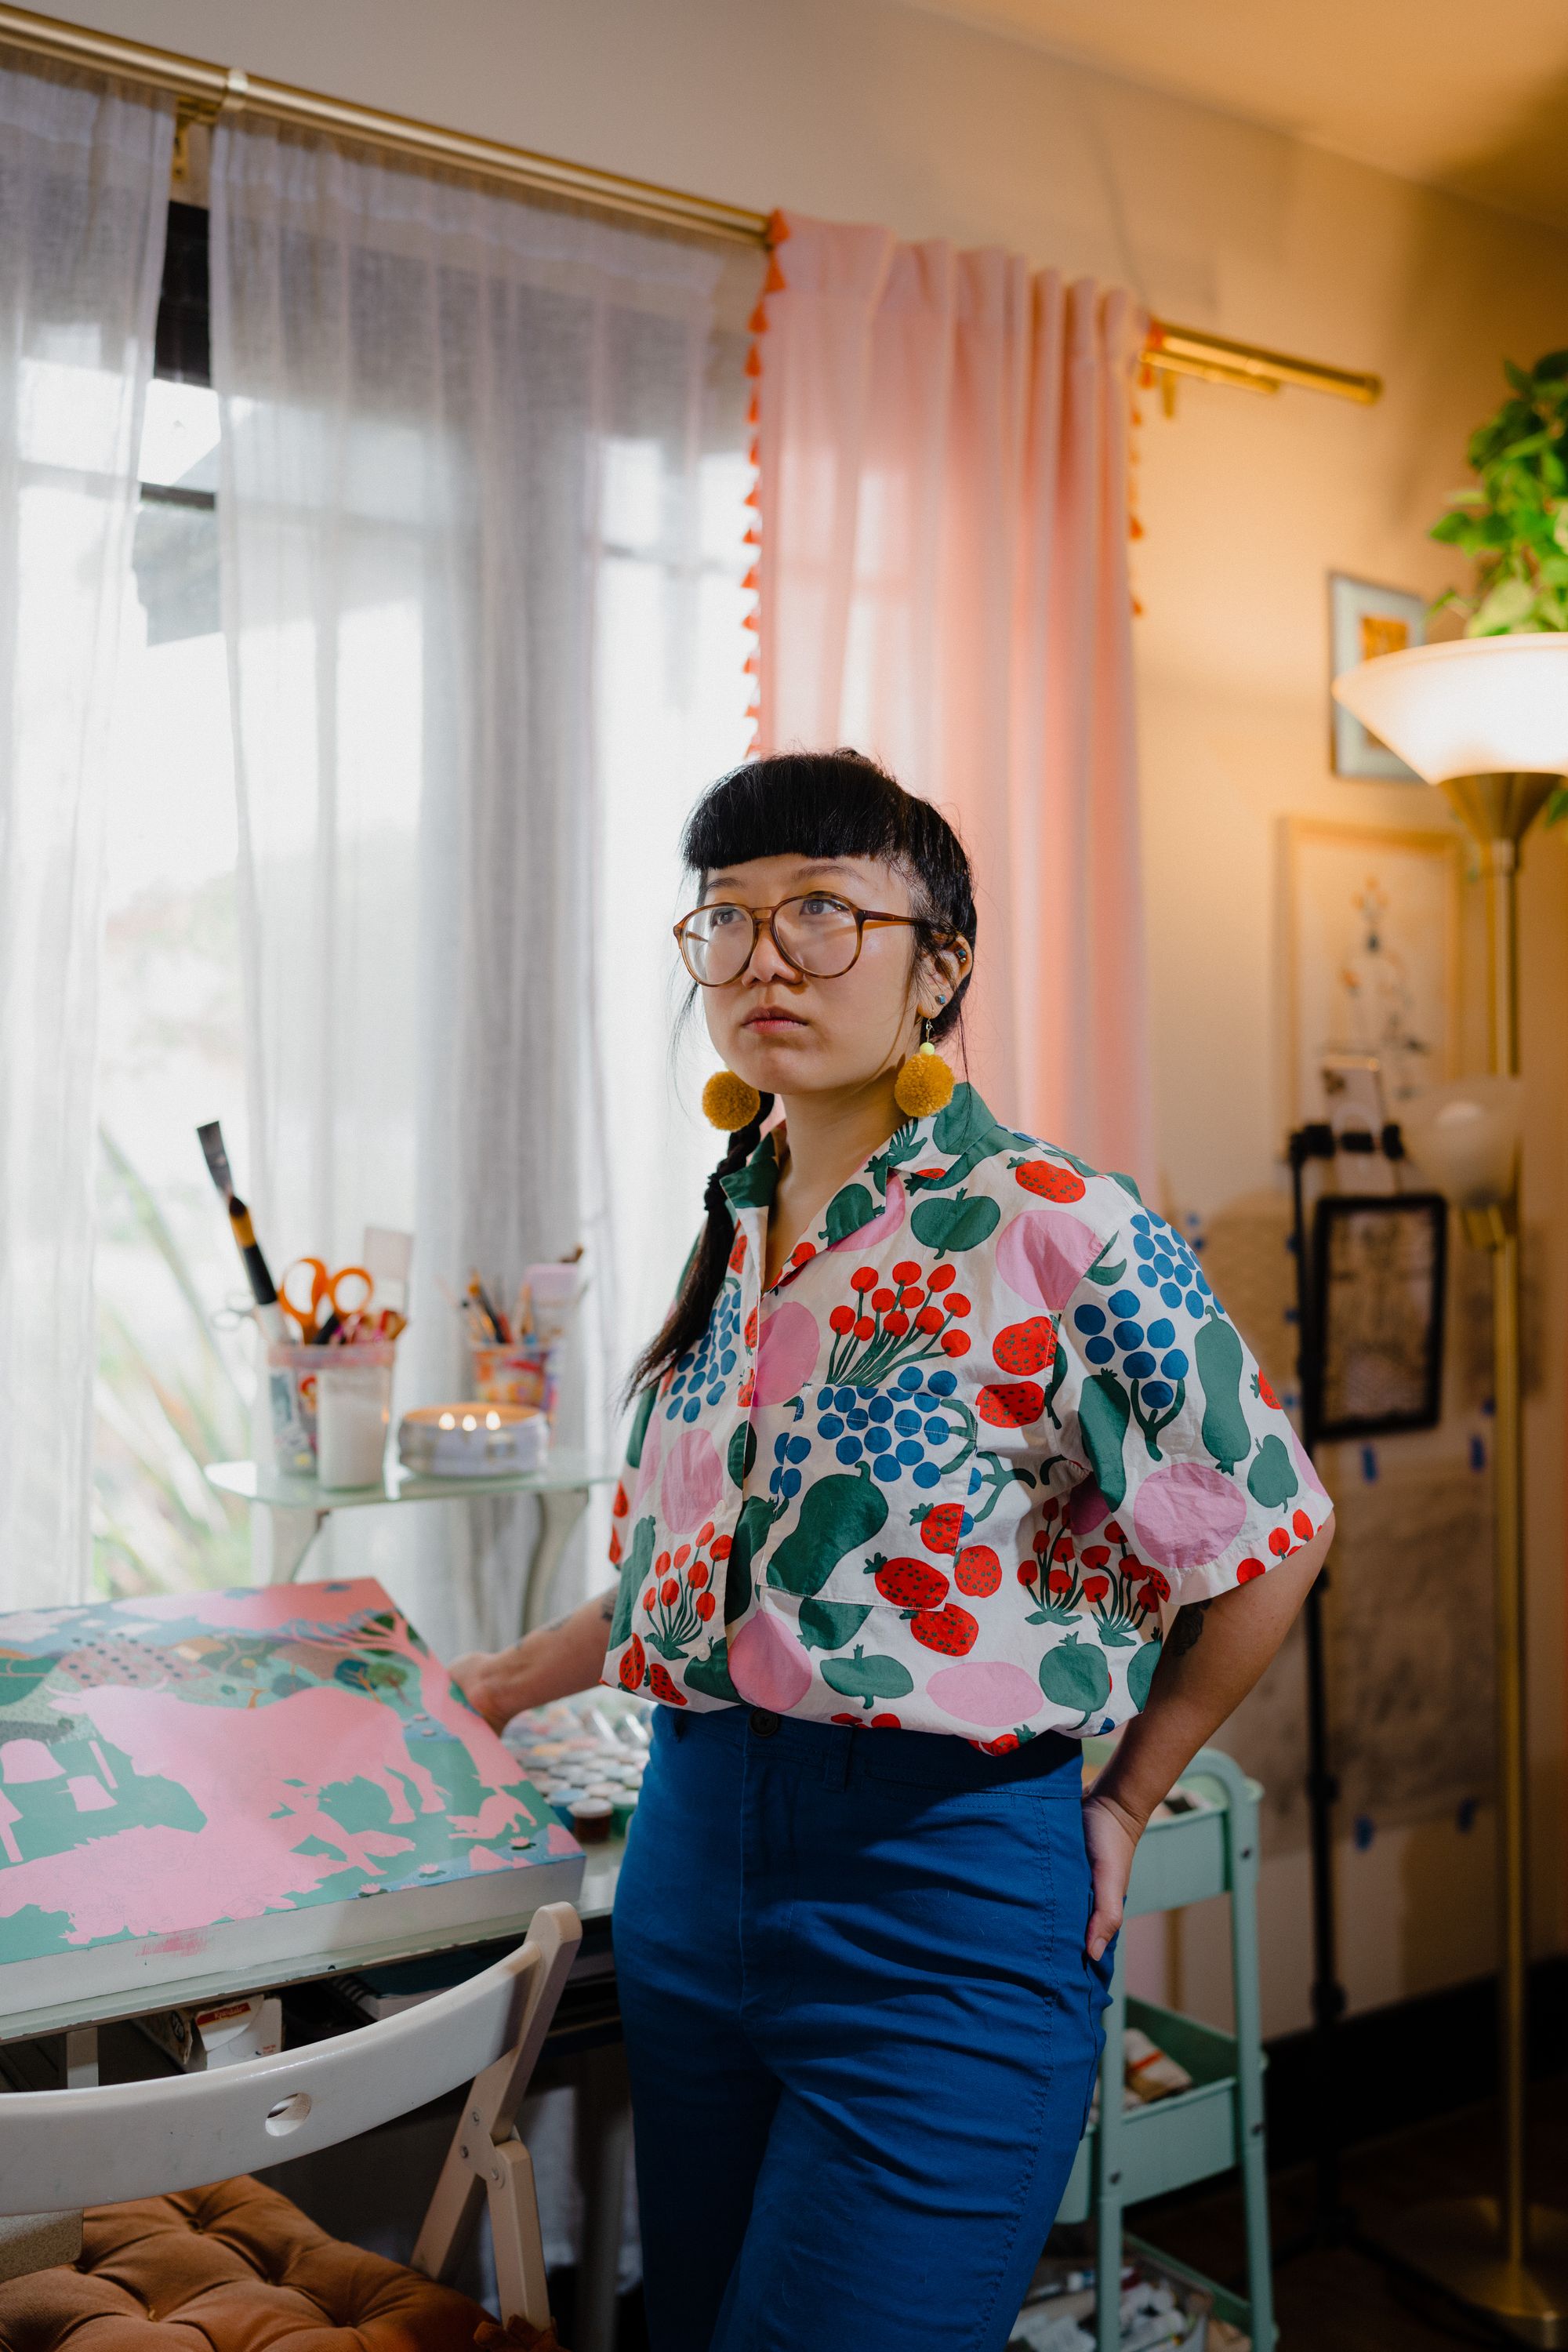 Photographic portrait of painter and illustrator Kristen Liu-Wong standing in her home studio showing her latest painting in progress.